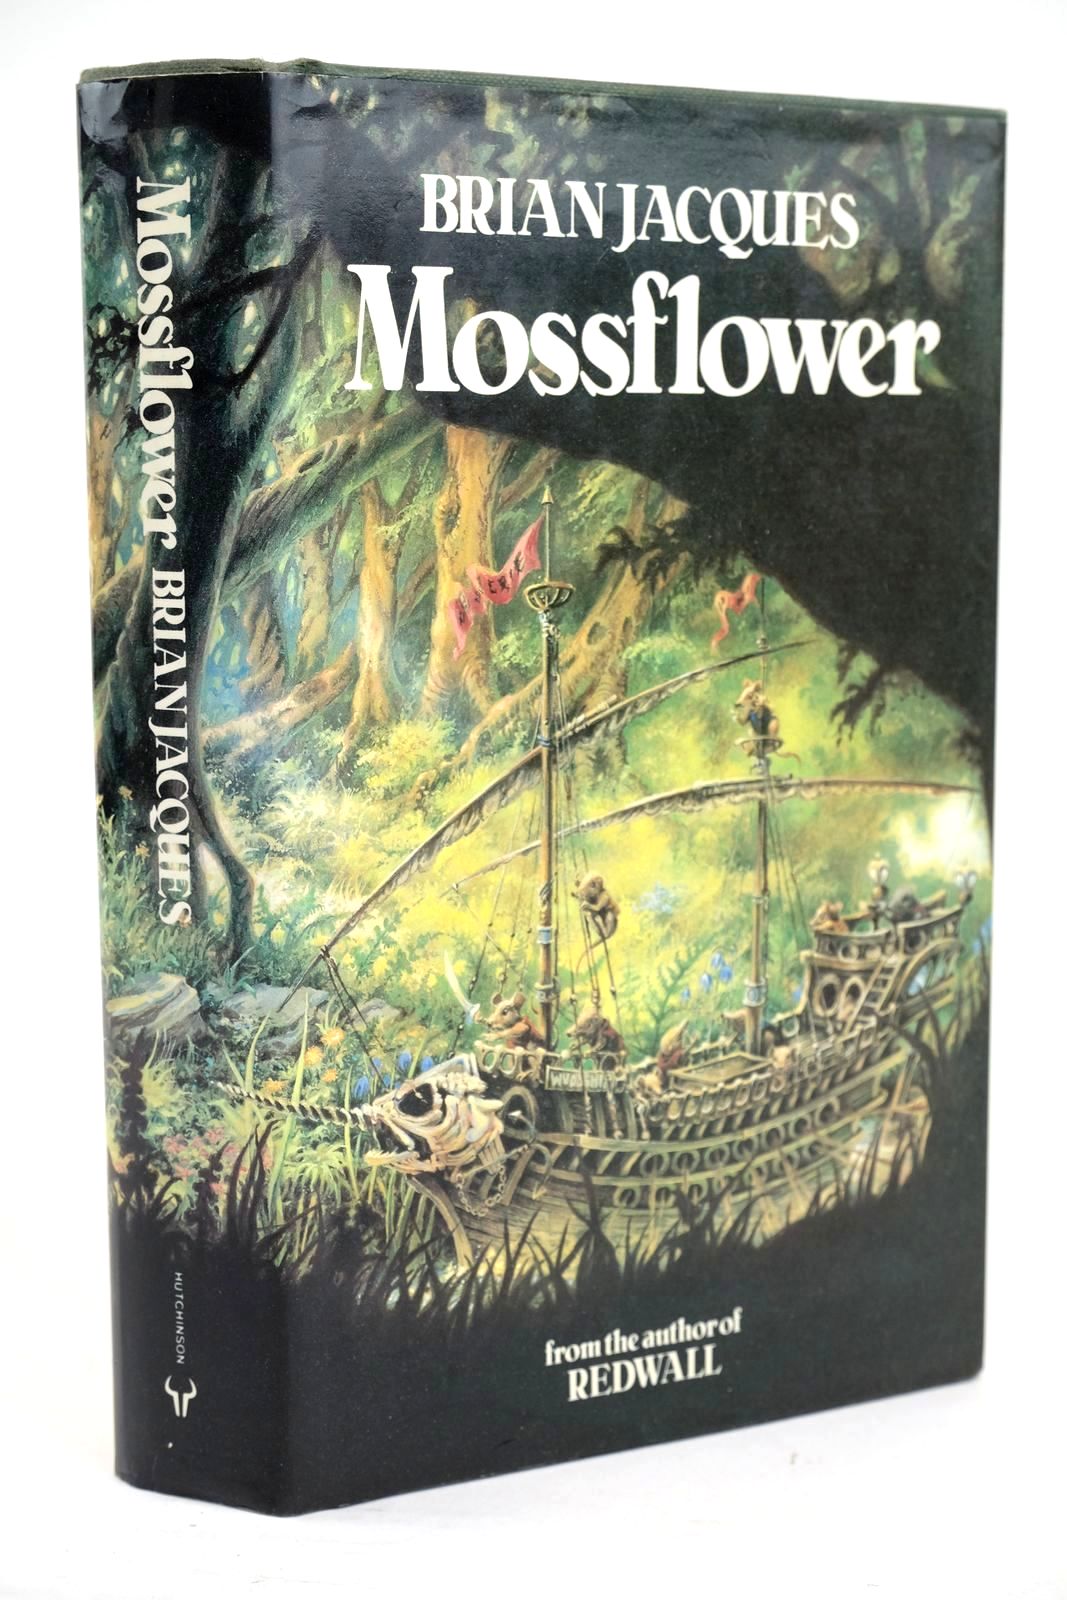 Photo of MOSSFLOWER written by Jacques, Brian illustrated by Chalk, Gary published by Hutchinson (STOCK CODE: 1319402)  for sale by Stella & Rose's Books